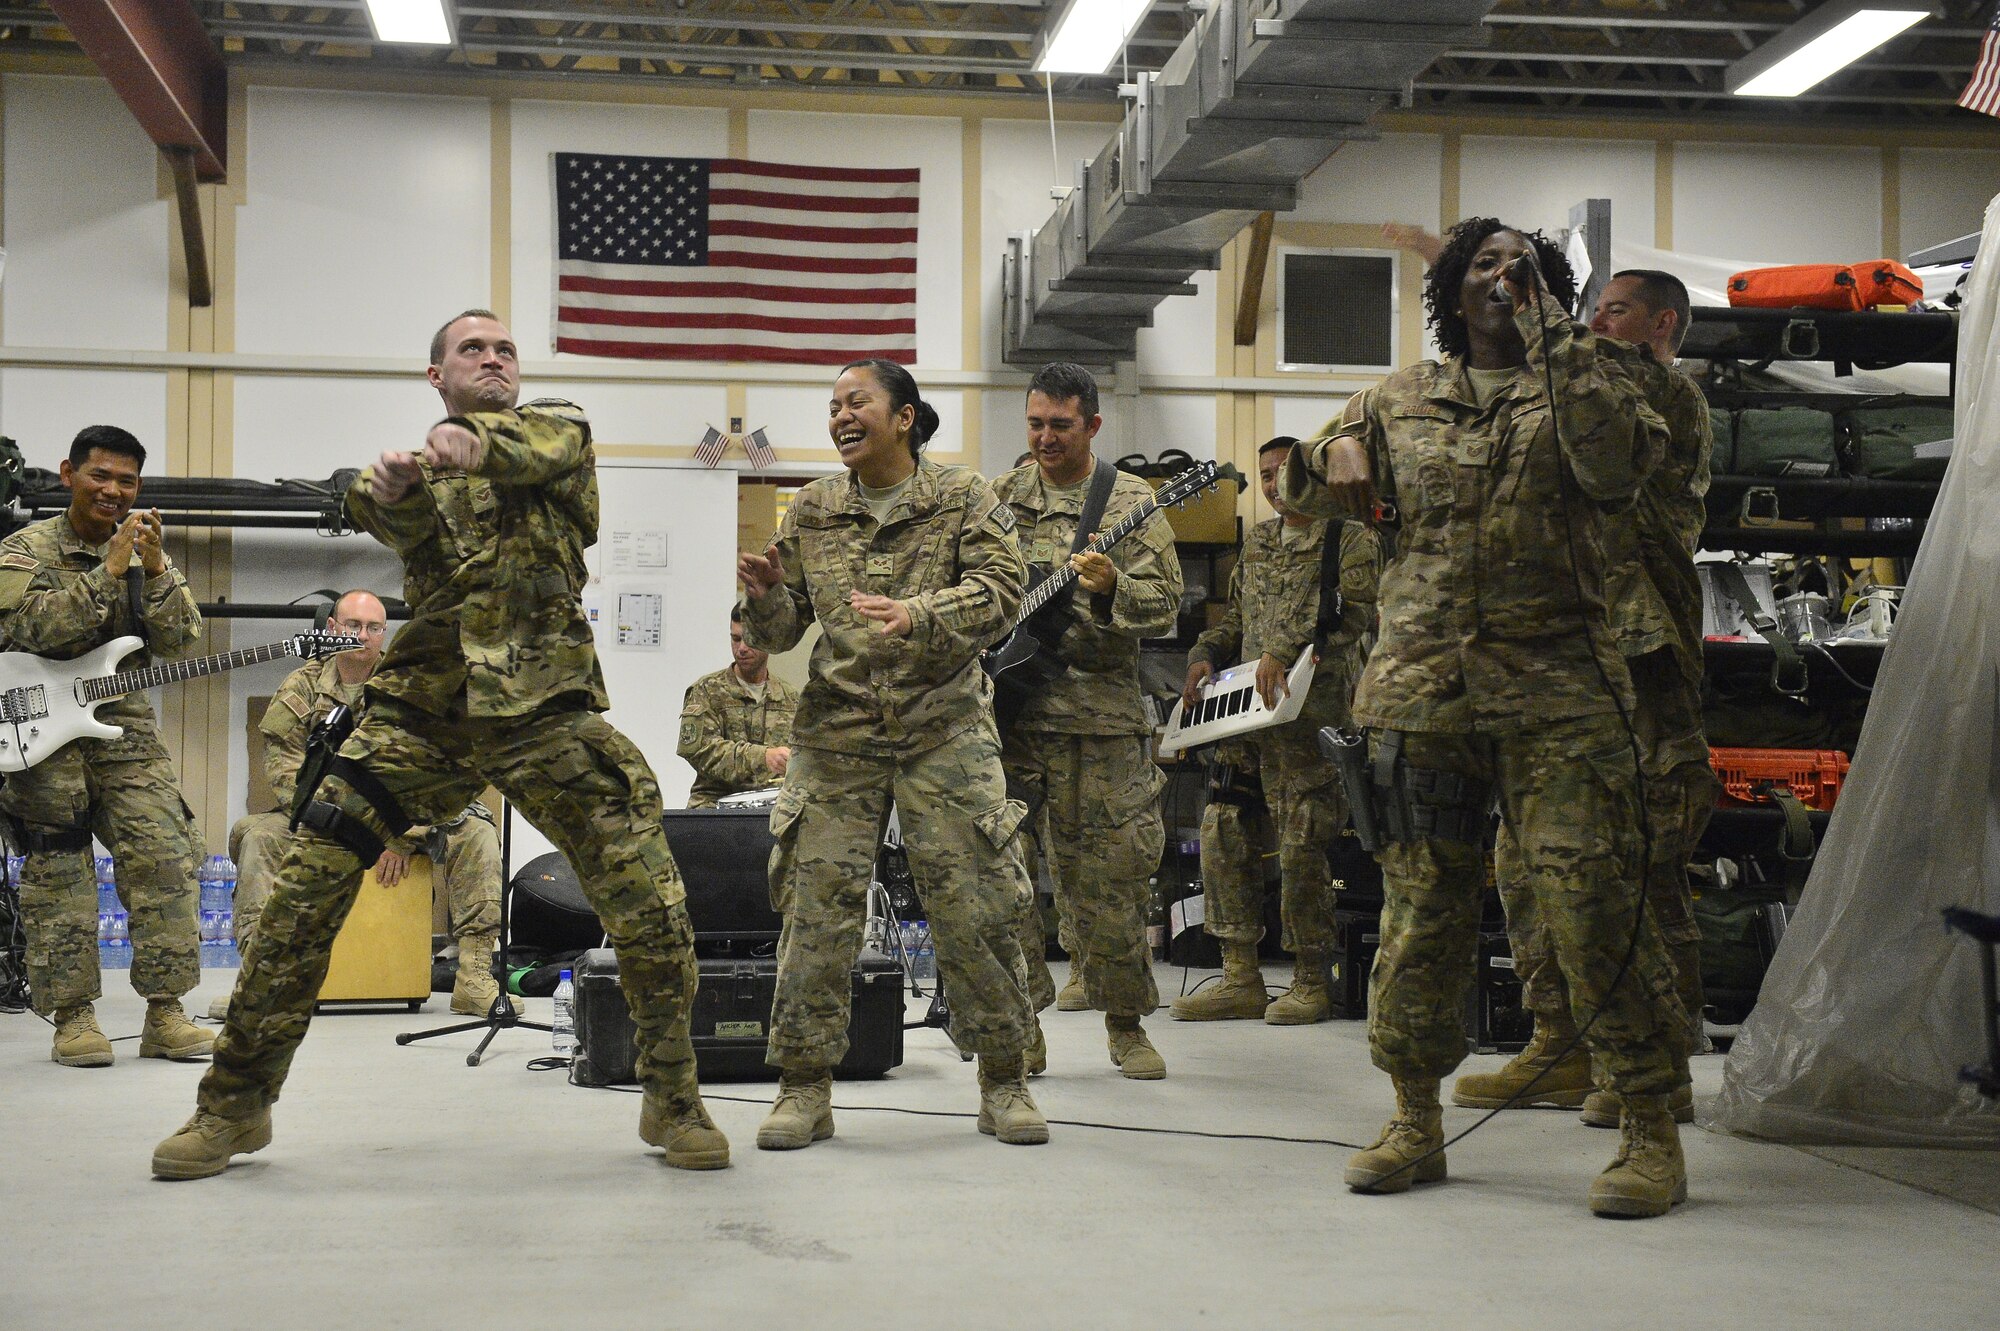 U.S. Air Force Tech. Sgt. Amber Grimes, right, performs with the U.S. Air Forces Command Band while members of the 455 Expeditionary Aeromedical Evacuation Squadron dance at Bagram Air Base April 11, 2014. The AFCENT Band, Hypersonic, deployed out of Yokota Air Base Japan recently completed a 17 day tour of the region performing for joint service members and coalition forces. (U.S. Air Force photo/Staff Sgt. Vernon Young)